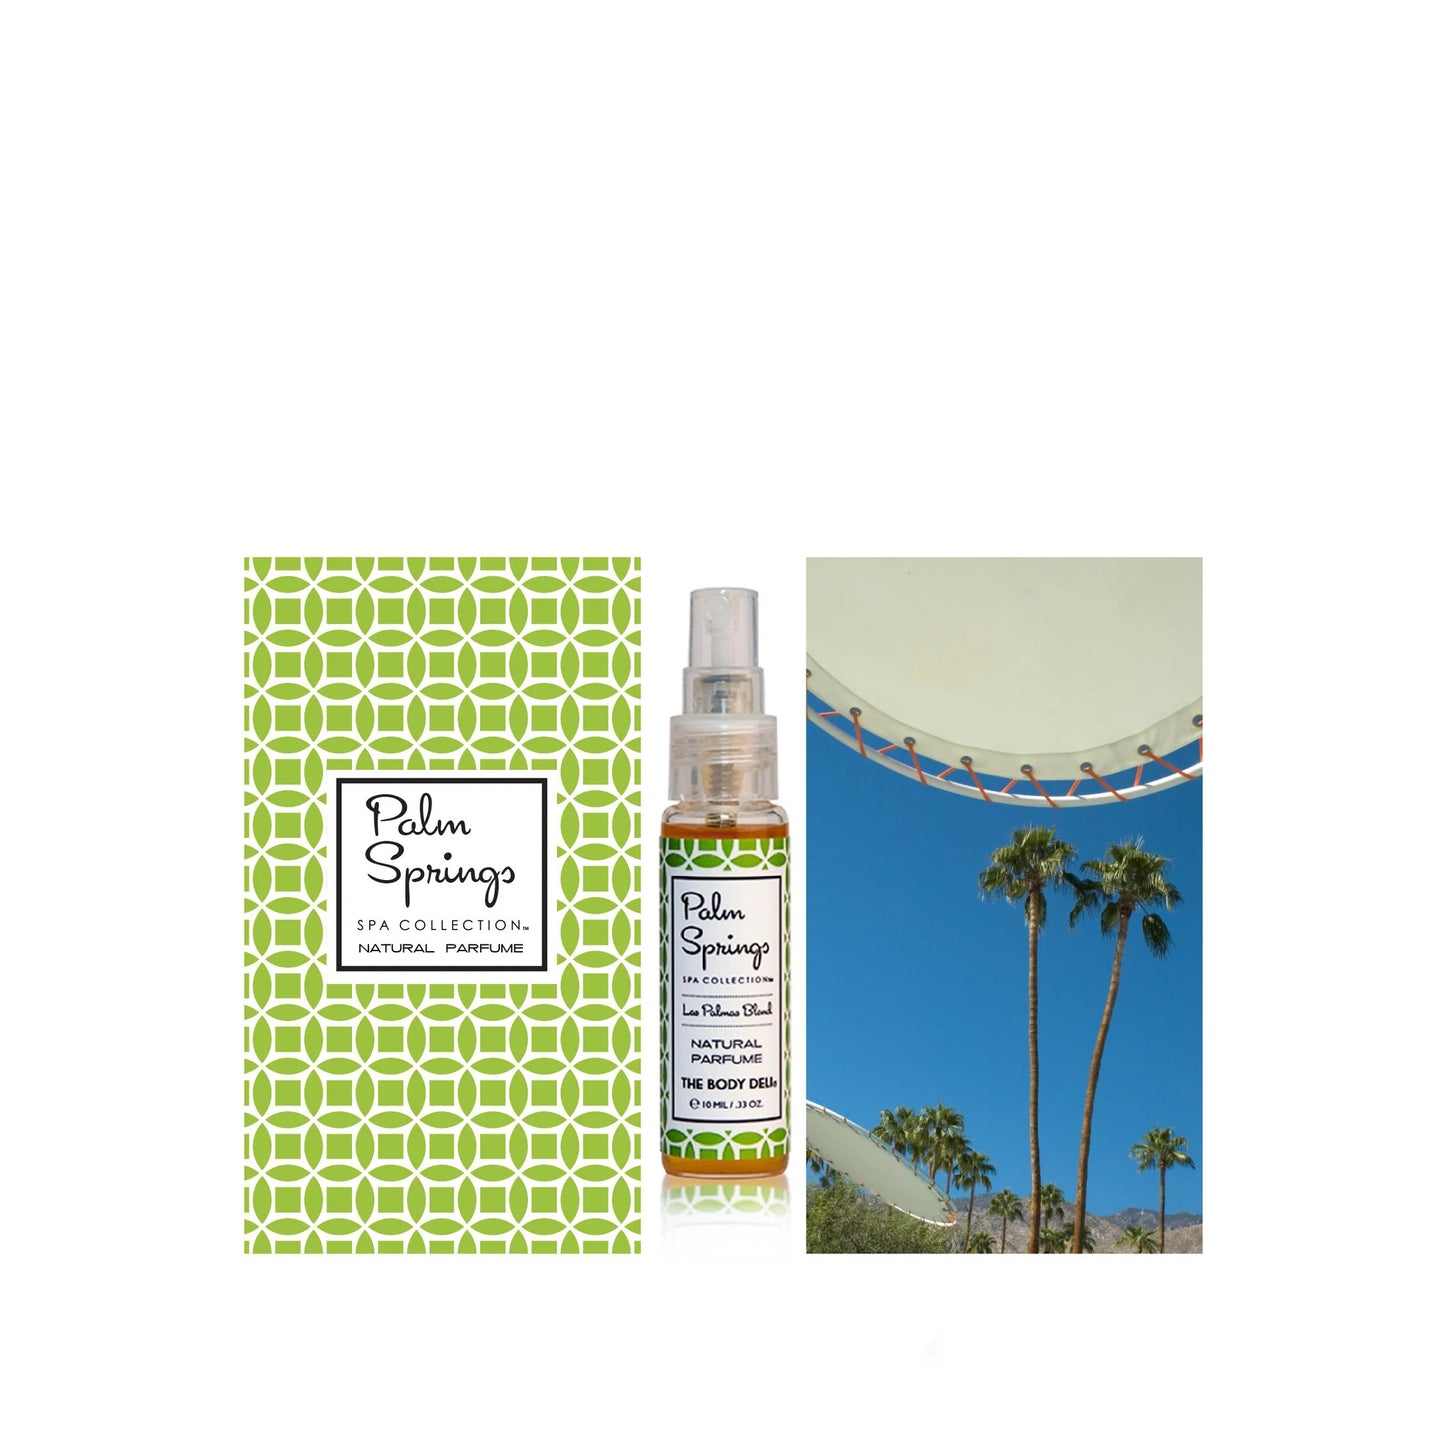 THE BODY DELI PALM SPRINGS Natural Perfume full size